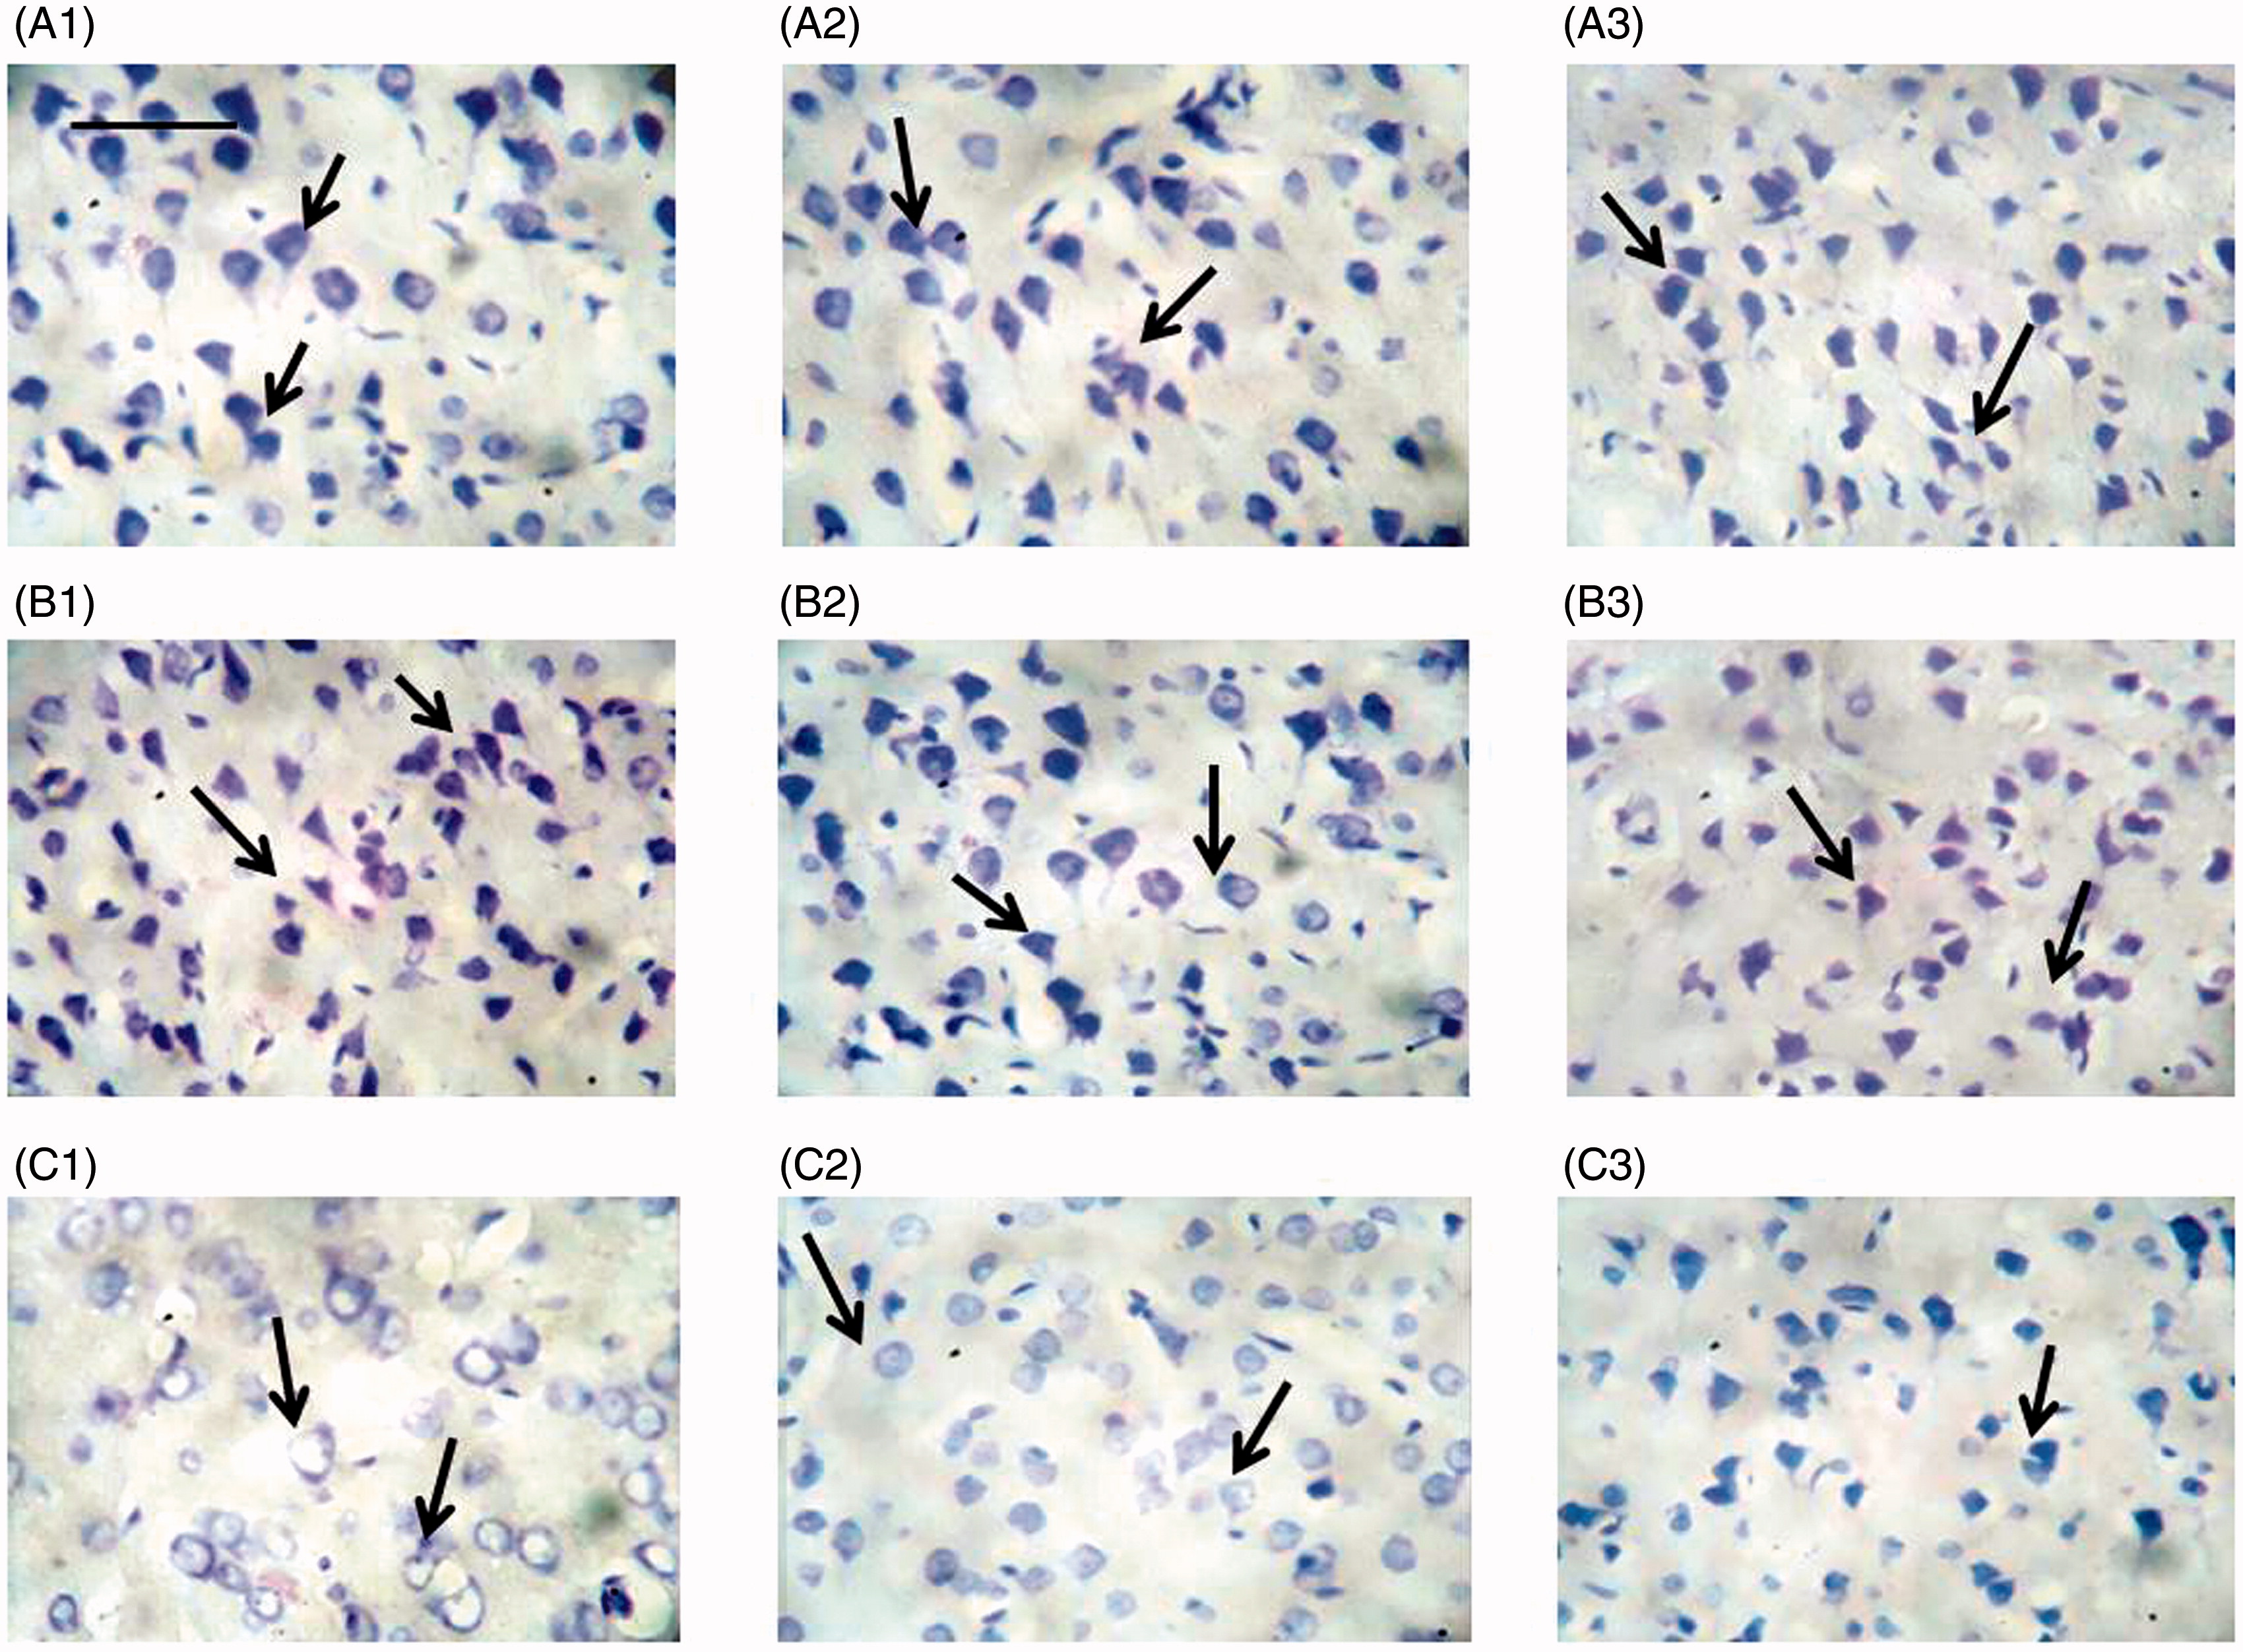 Figure 1. Nissl (cresyl violet) staining of neurons in different brain areas in rats. Representative micrographs are shown. Control rats: (A) (top row); sham-operated rats: (B) (middle row); ICIR [icv colchicine injected]: (C) (last row). Frontal cortex: 1 (left column), parietal cortex: 2 (middle column), occipital cortex: 3 (right column). Letter and number indicate group and specific brain region (e.g. A1: Frontal cortex, control rat). Magnification: 400 × , length of bar = 16.18 μm. Arrows indicate Nissl granules.